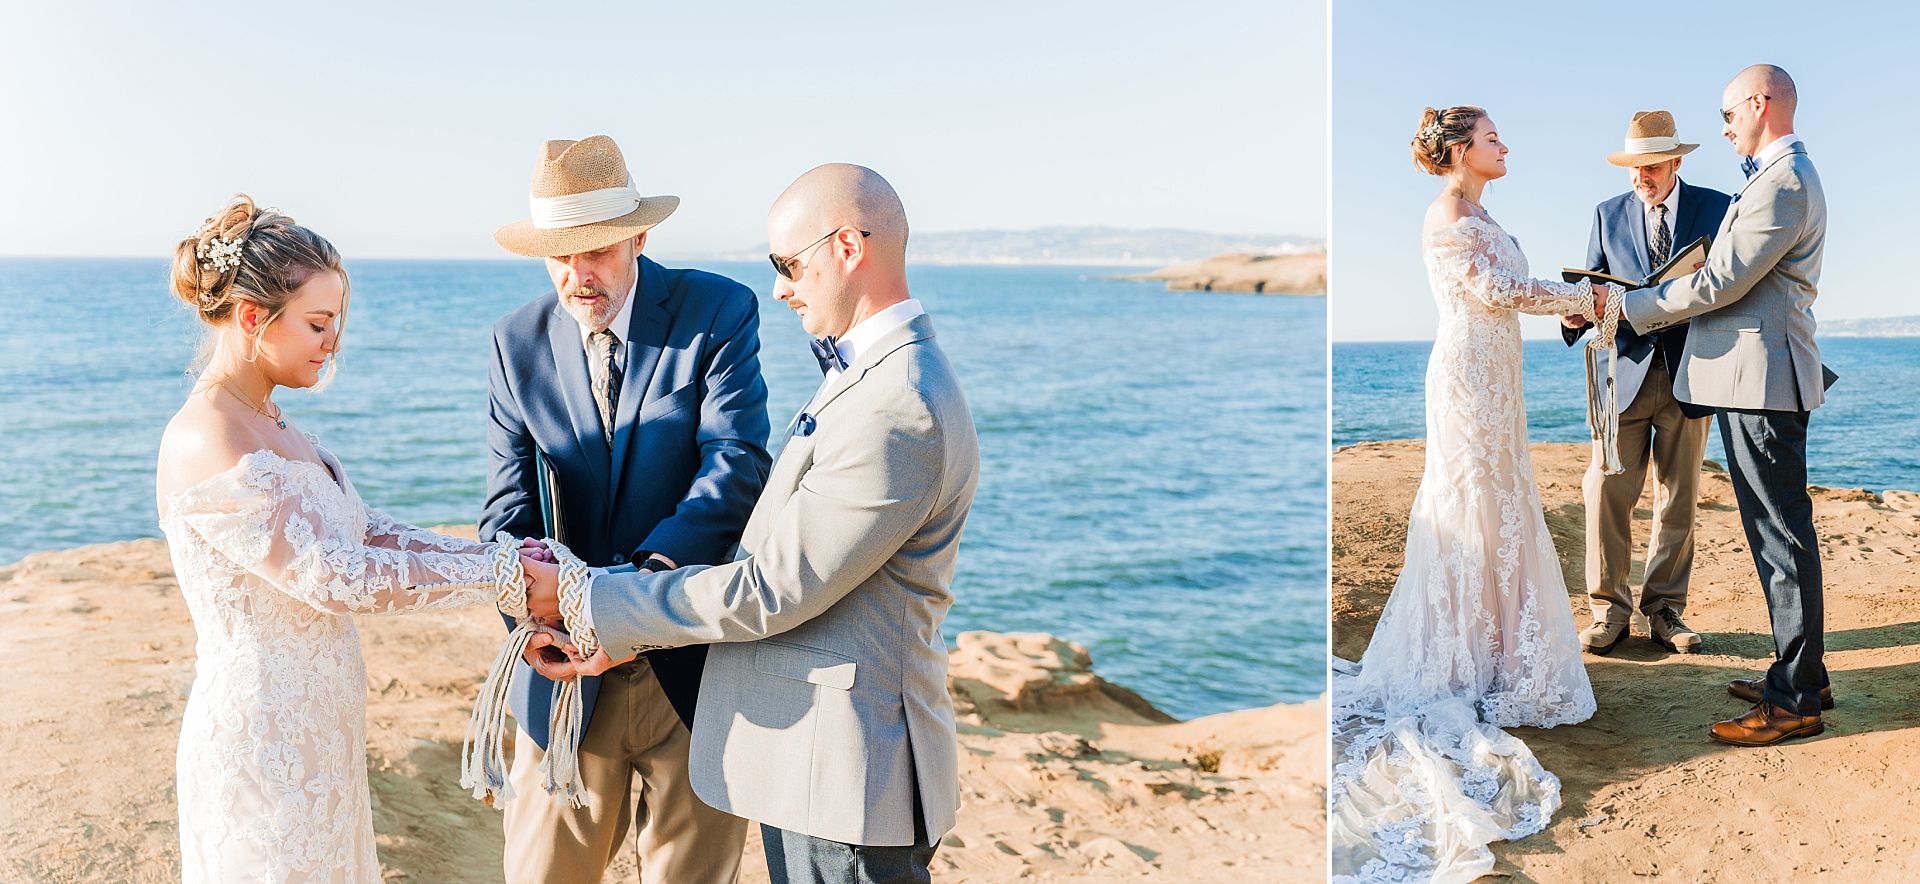 Couple engaged in handfasting ceremony at Sunset Cliffs beach wedding in San Diego